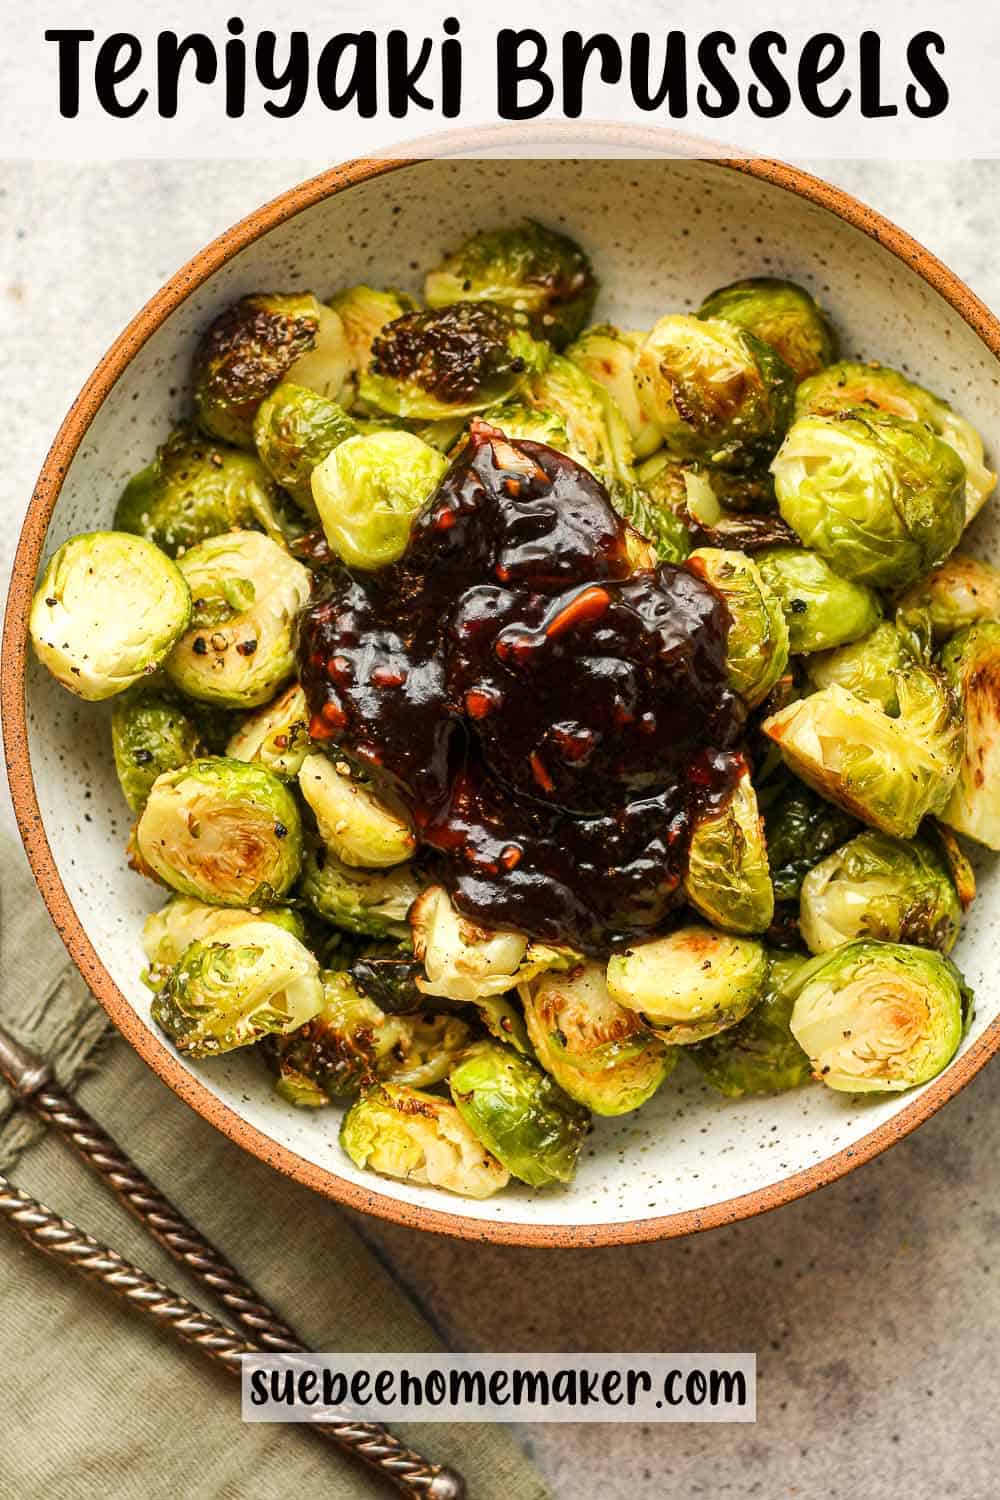 A bowl of roasted brussels sprouts with teriyaki sauce piled on top.